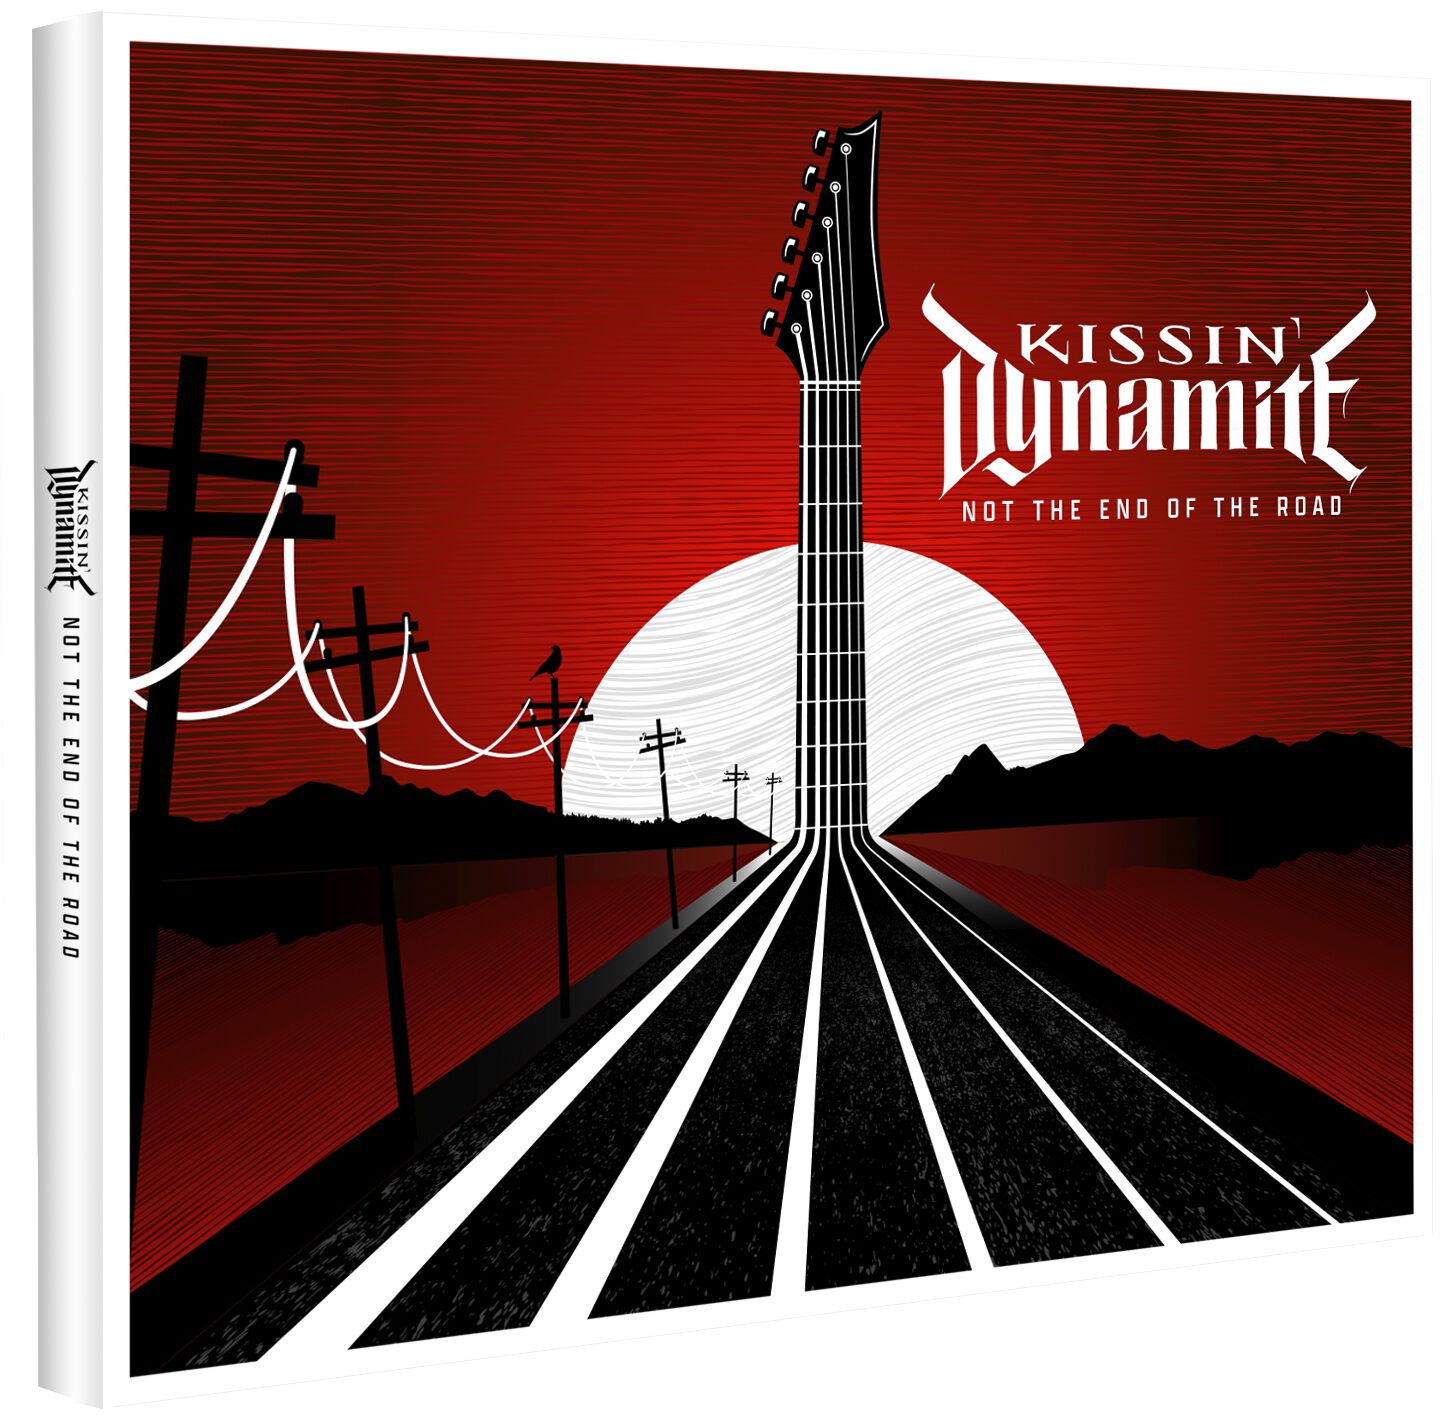 Image of Kissin' Dynamite Not the end of the road CD Standard